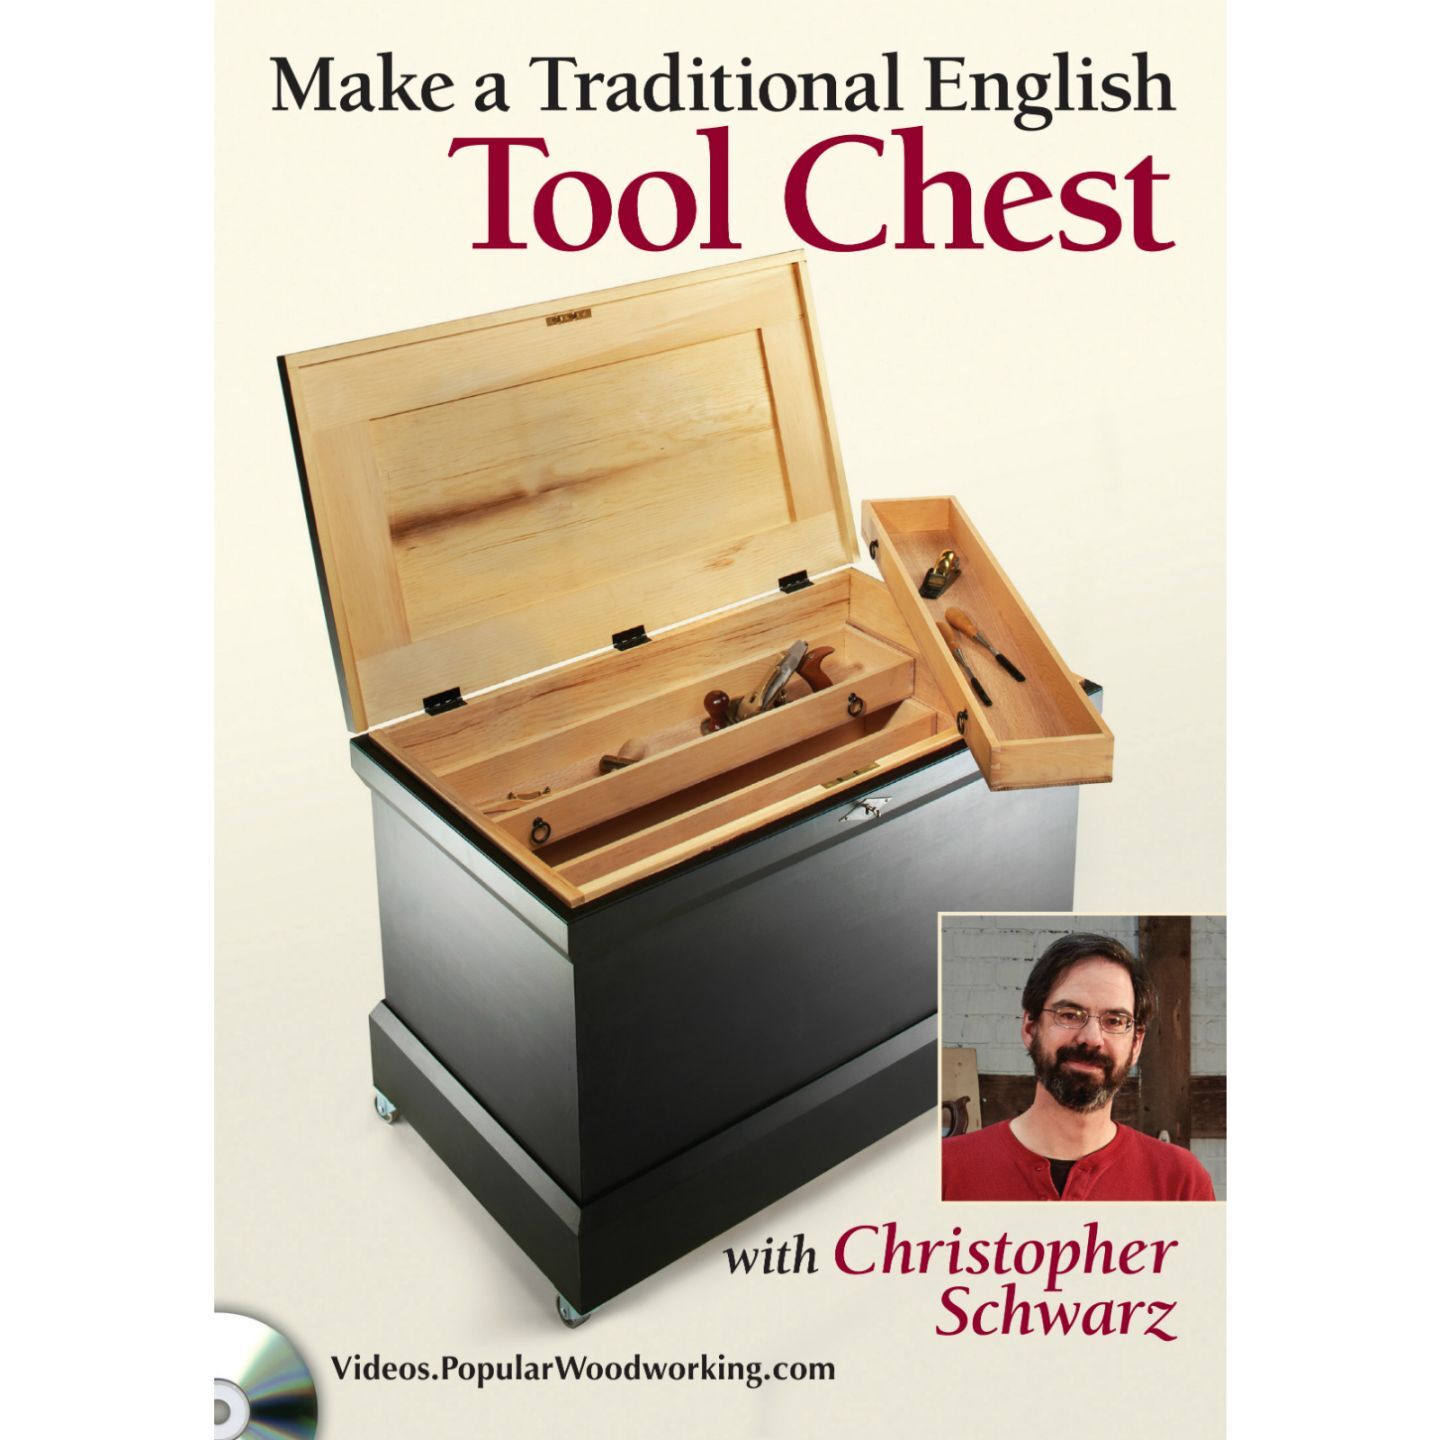 Make a Traditional English Tool Chest with Christopher Schwarz (DVD)